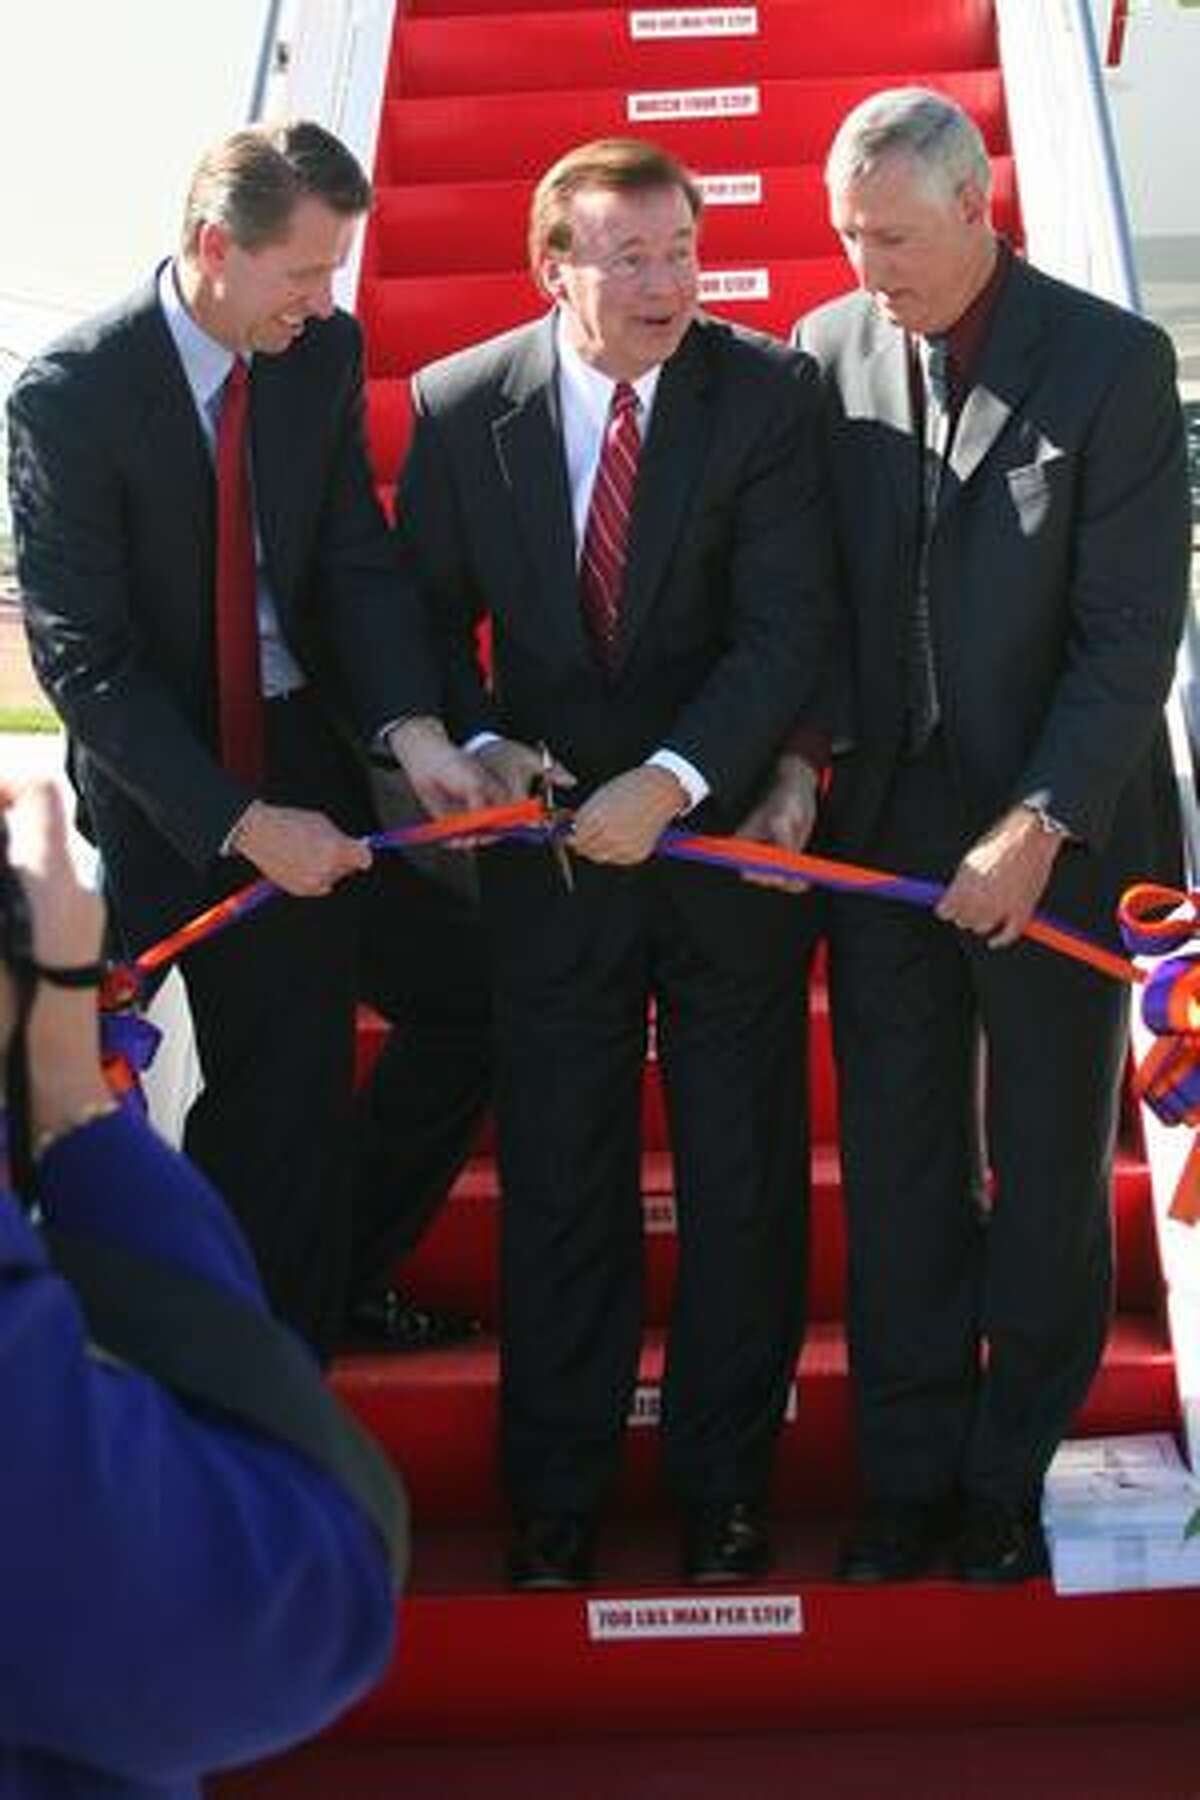 David Bronczek, president and chief executive of FedEx Express, has trouble cutting the ribbon on FedEx's first Boeing 777 Freighter. Kevin Schemm, vice president of North America sales for Boeing Commercial Airplanes (left), and Larry Loftis, general manager of the 777 program, hold the ribbon. Boeing delivered the freighter on Sept. 22, 2009.